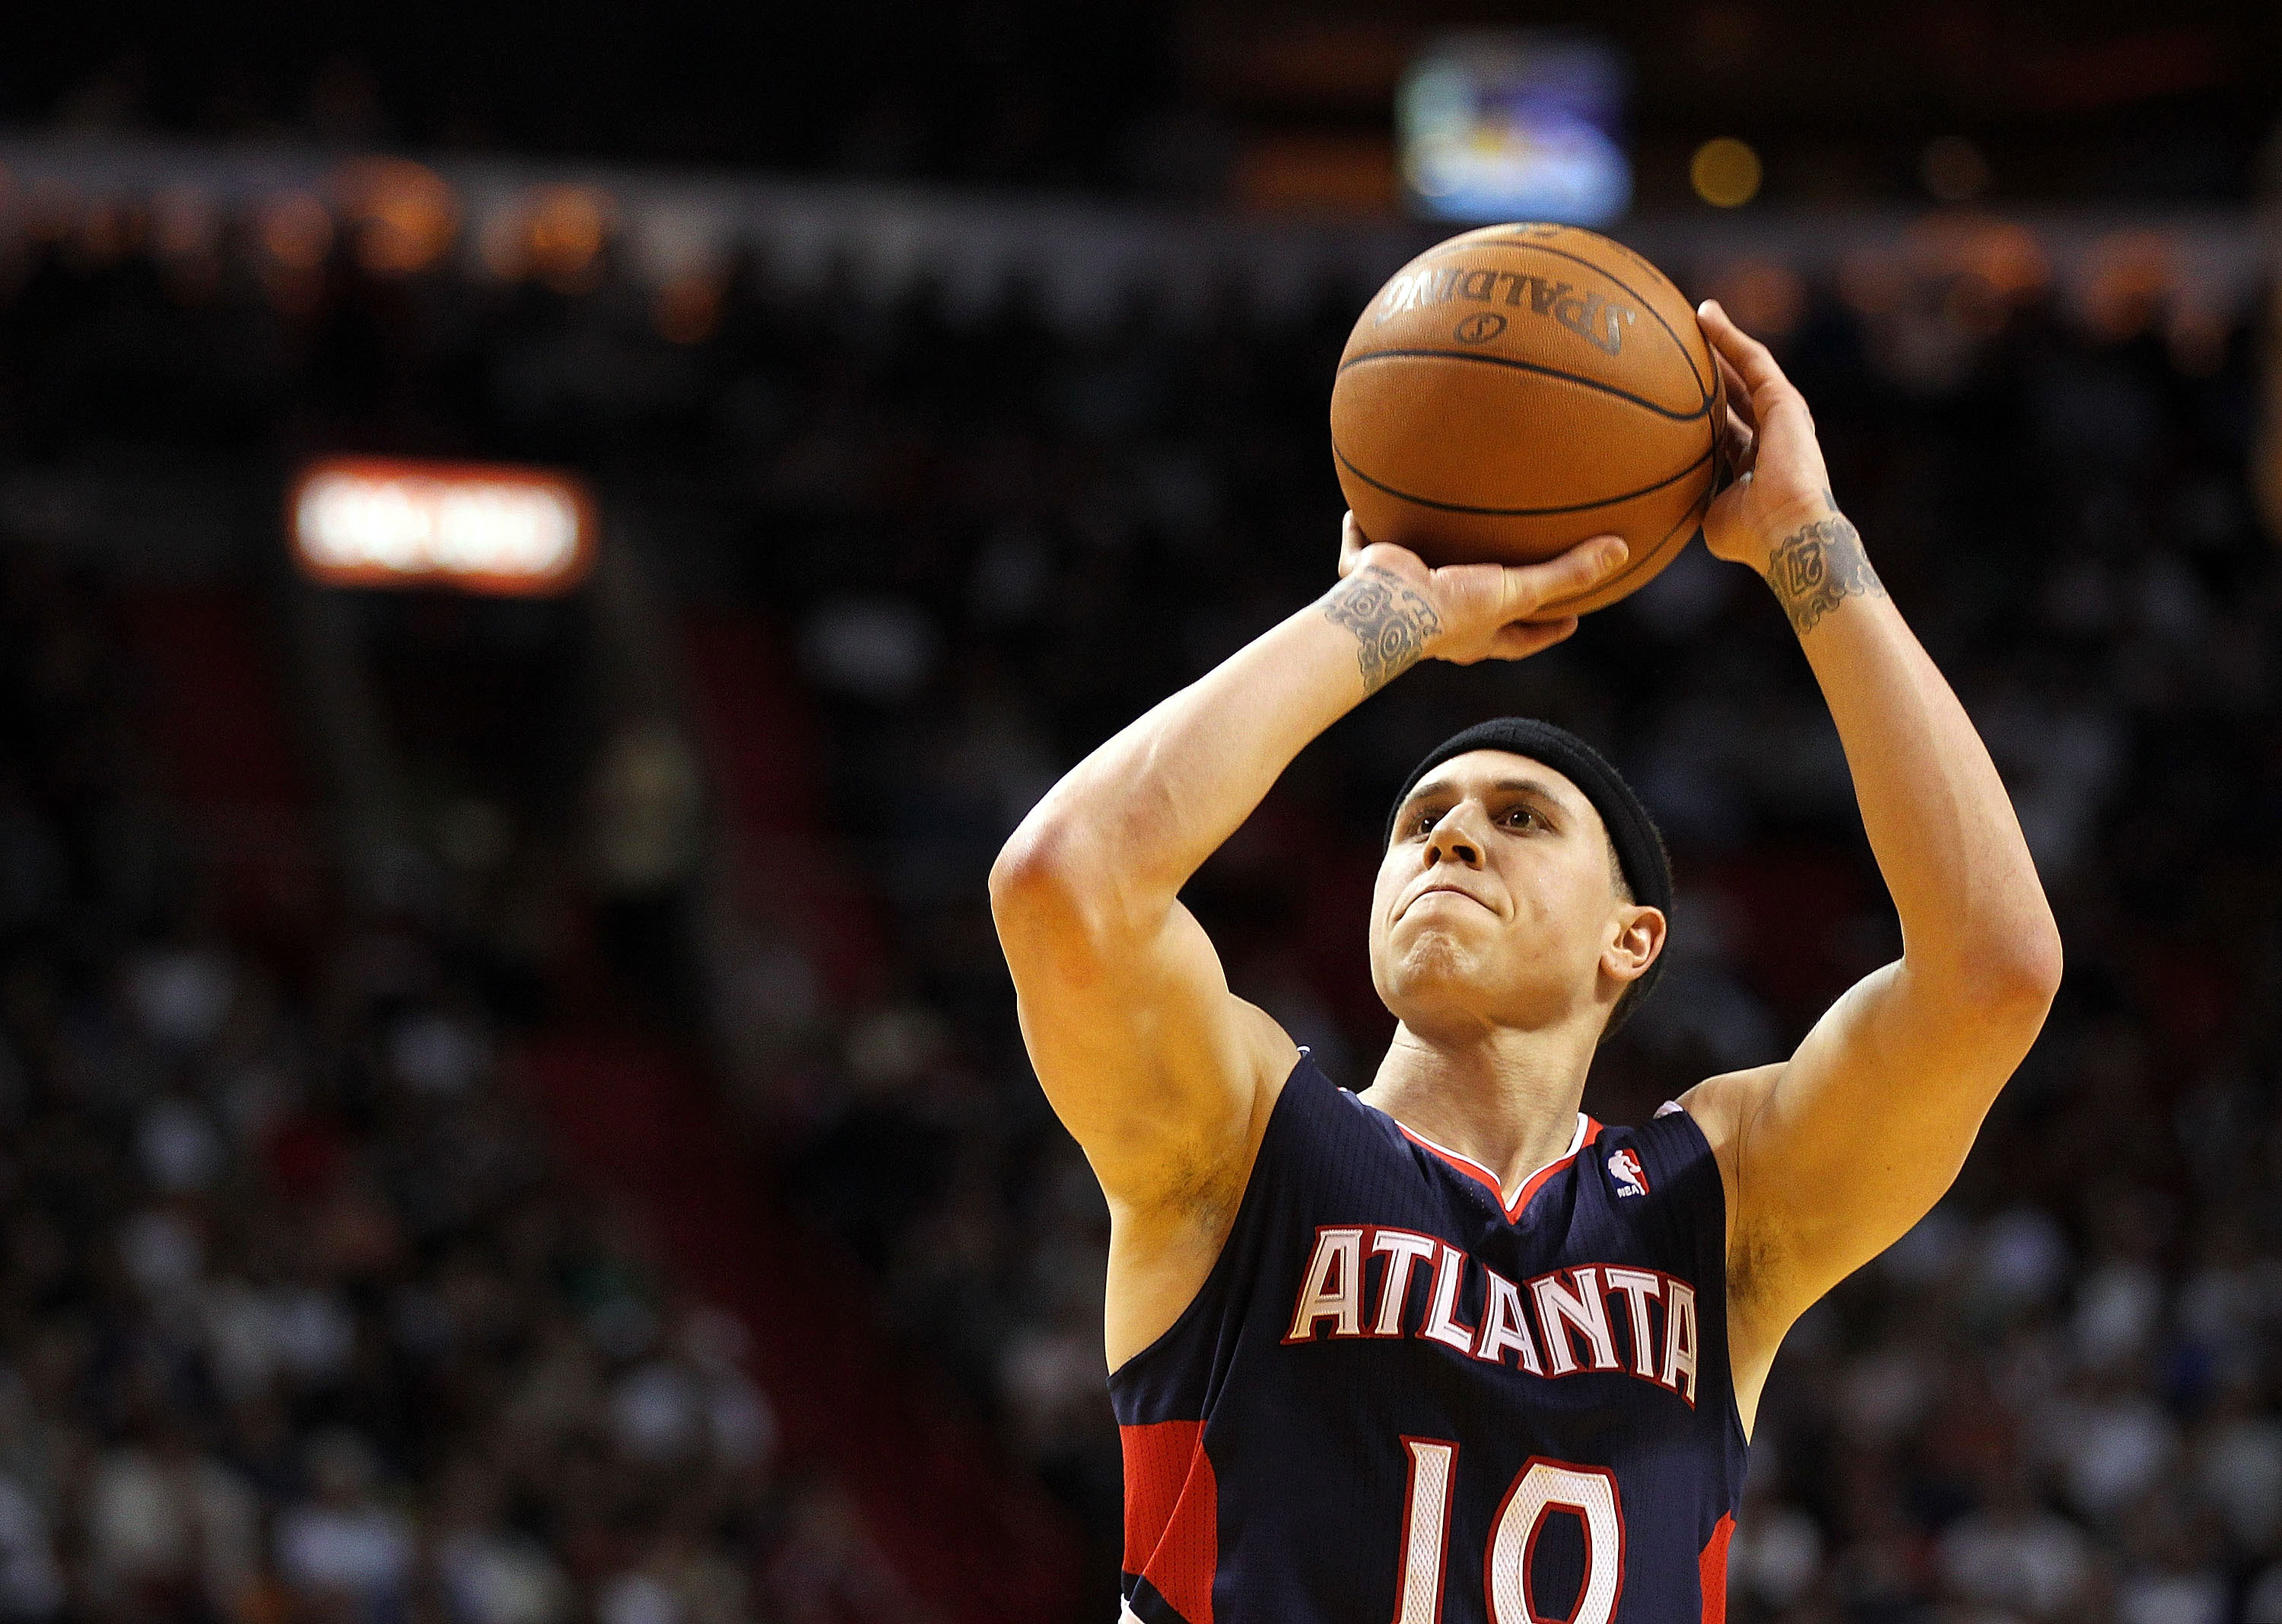 MIAMI, FL - JANUARY 18:  Mike Bibby #10 of the Atlanta Hawks shoots a free throw during a game against the Miami Heat at American Airlines Arena on January 18, 2011 in Miami, Florida. NOTE TO USER: User expressly acknowledges and agrees that, by downloadi